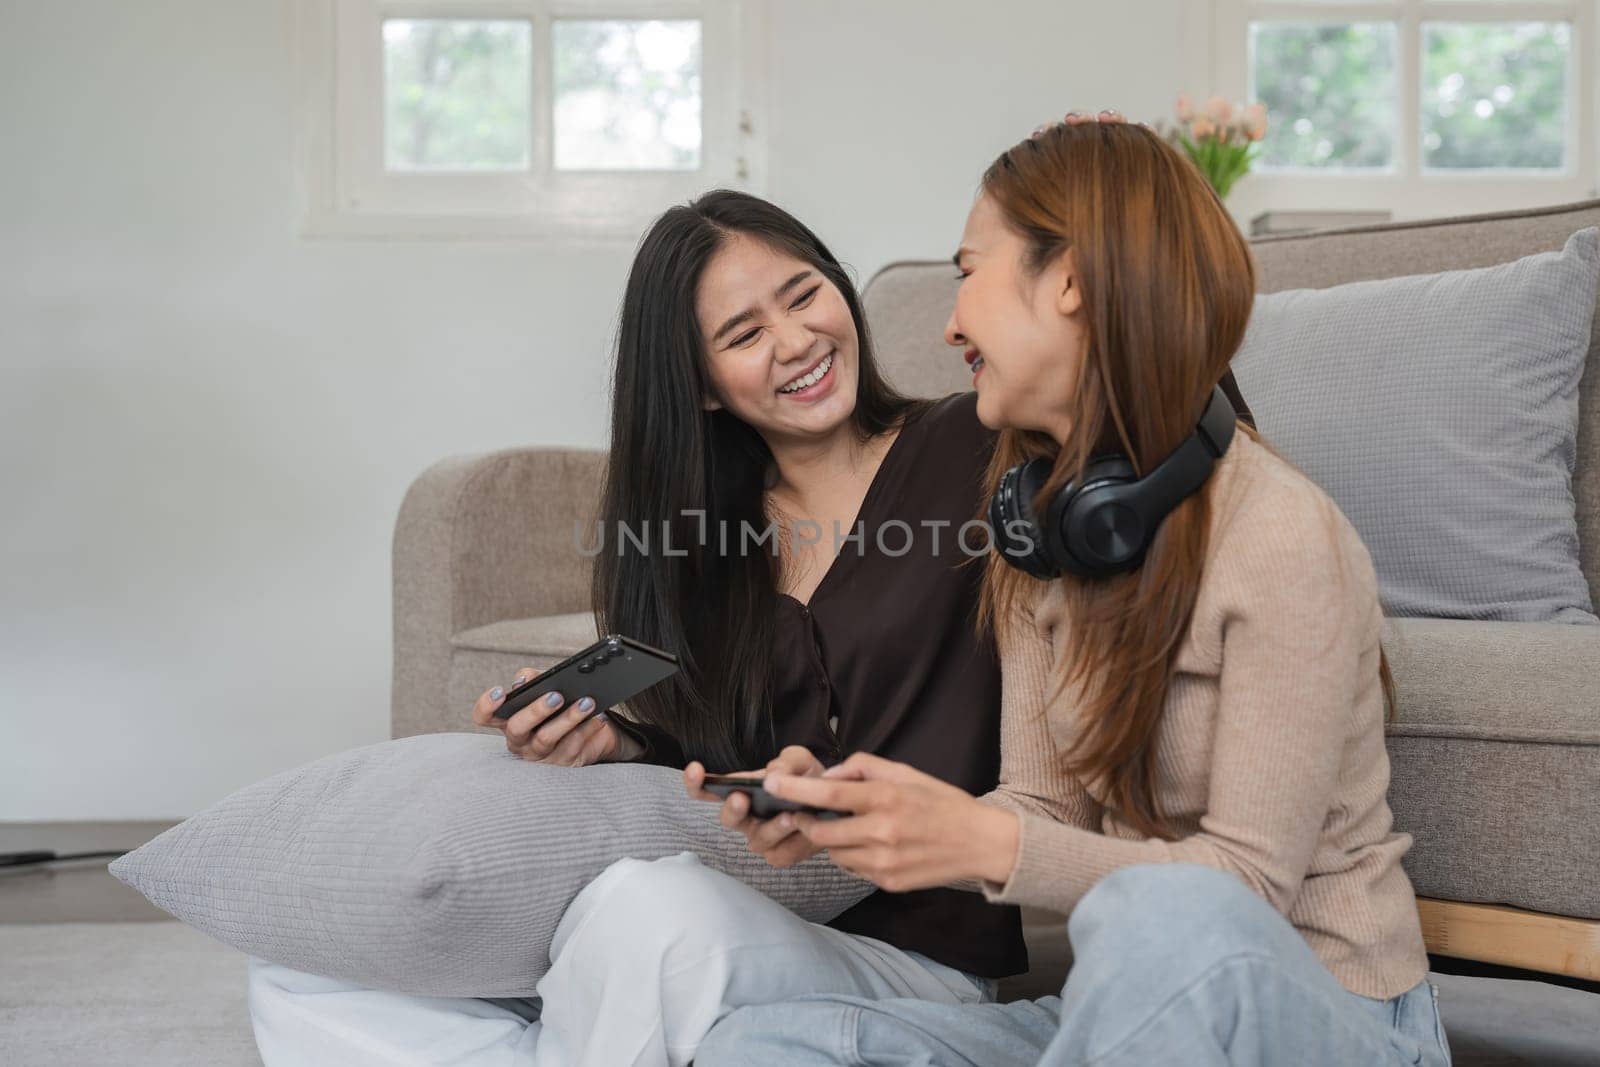 Two women share a joyful moment in a cozy living room, showcasing love and companionship in a contemporary home setting.